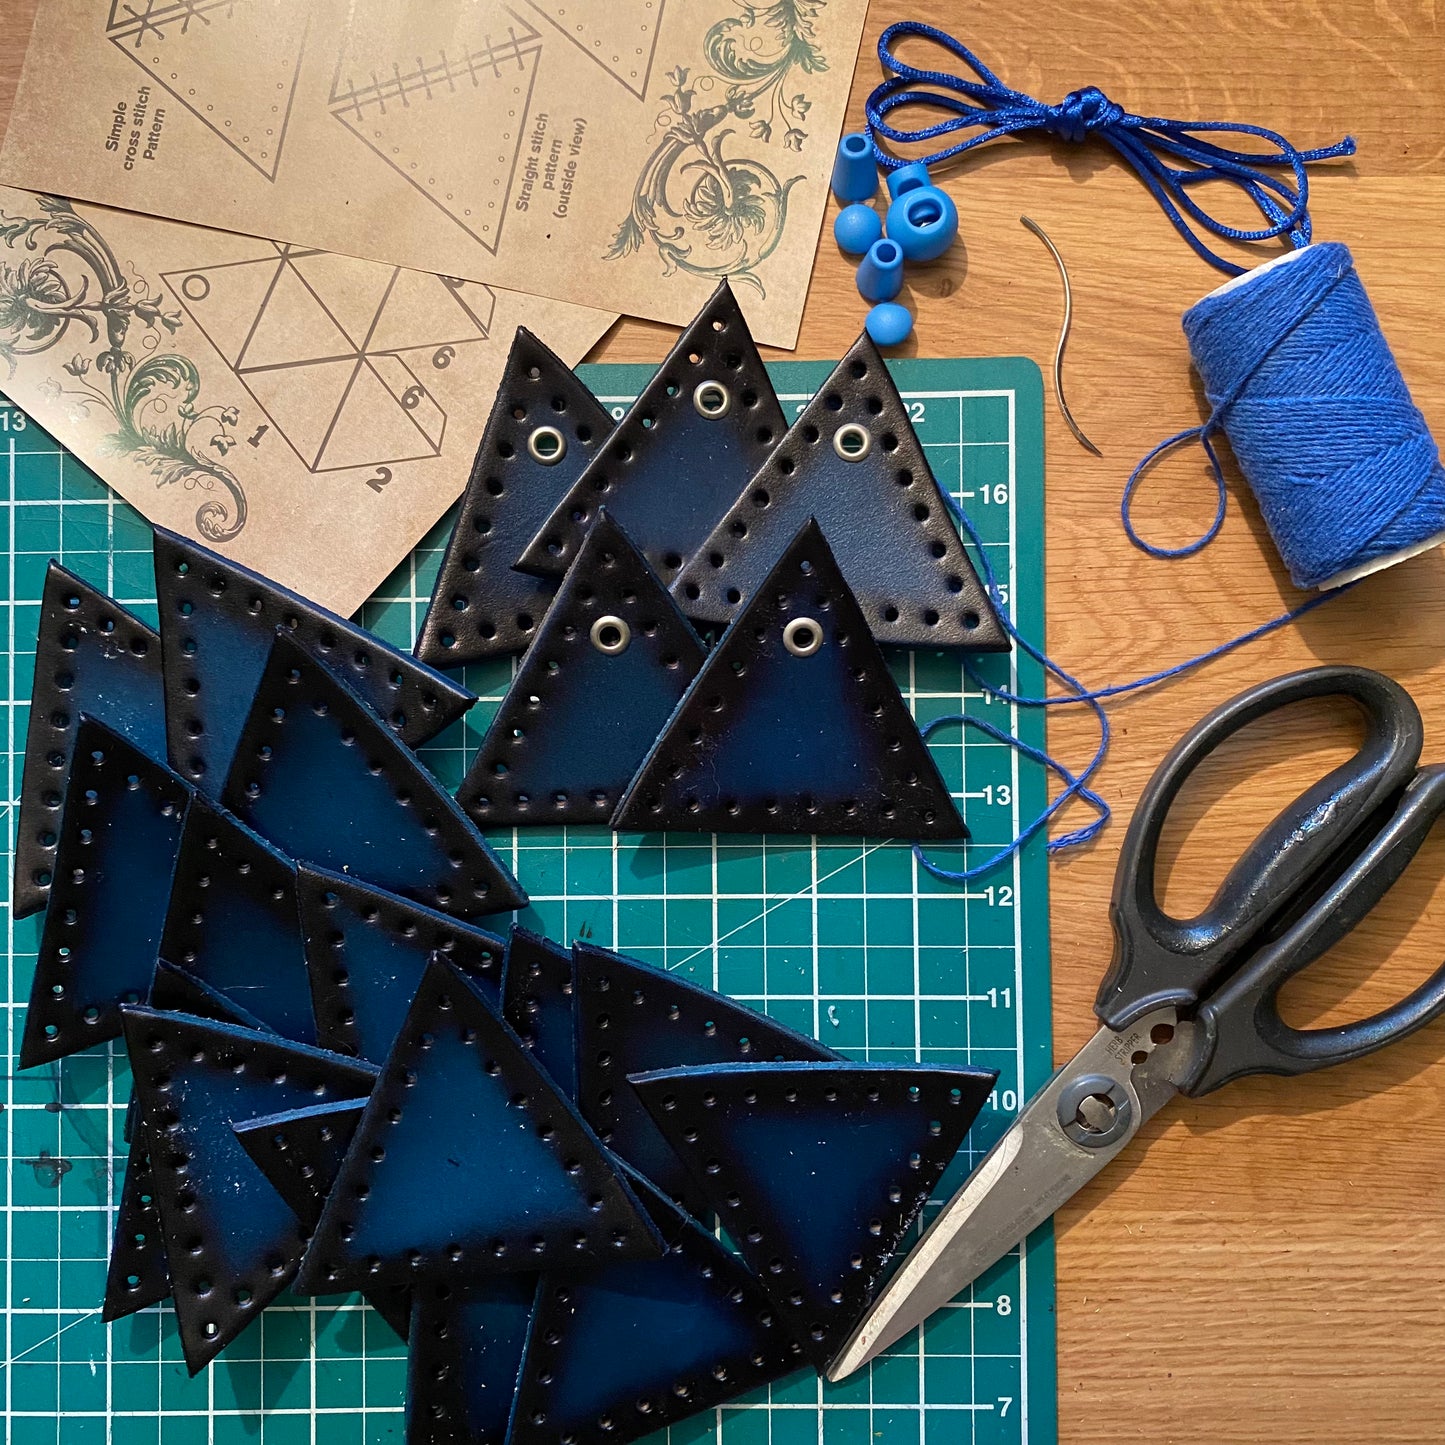 D20 Dice Bag Kit - Two by Two Blue: Blank